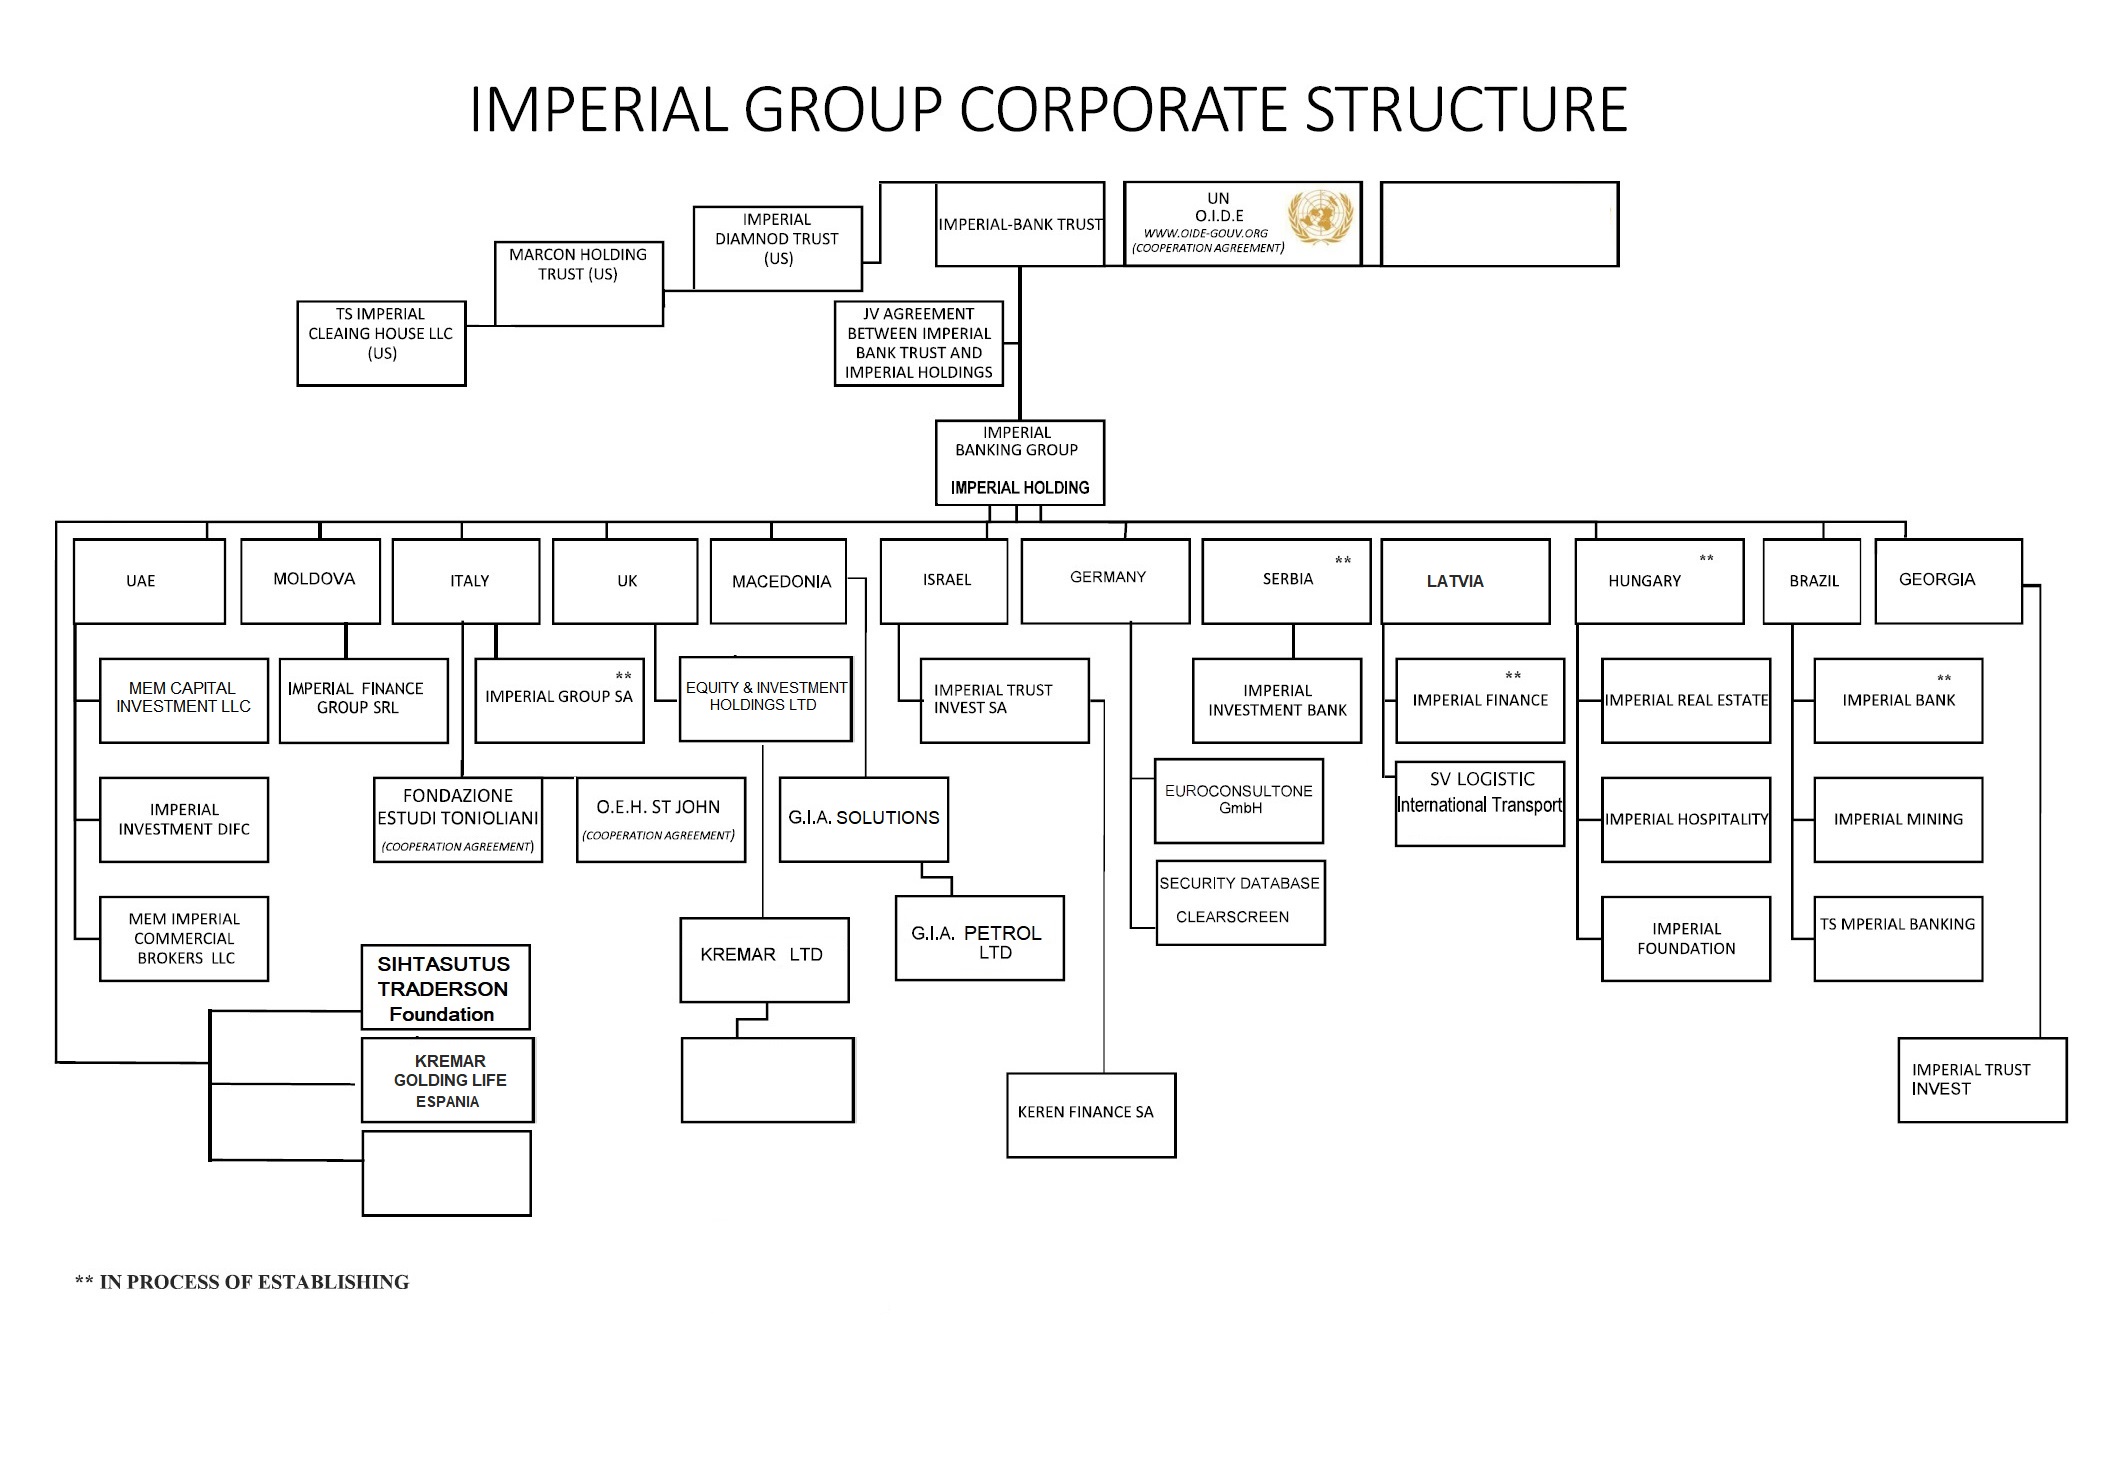 IMPERIAL Structure-1